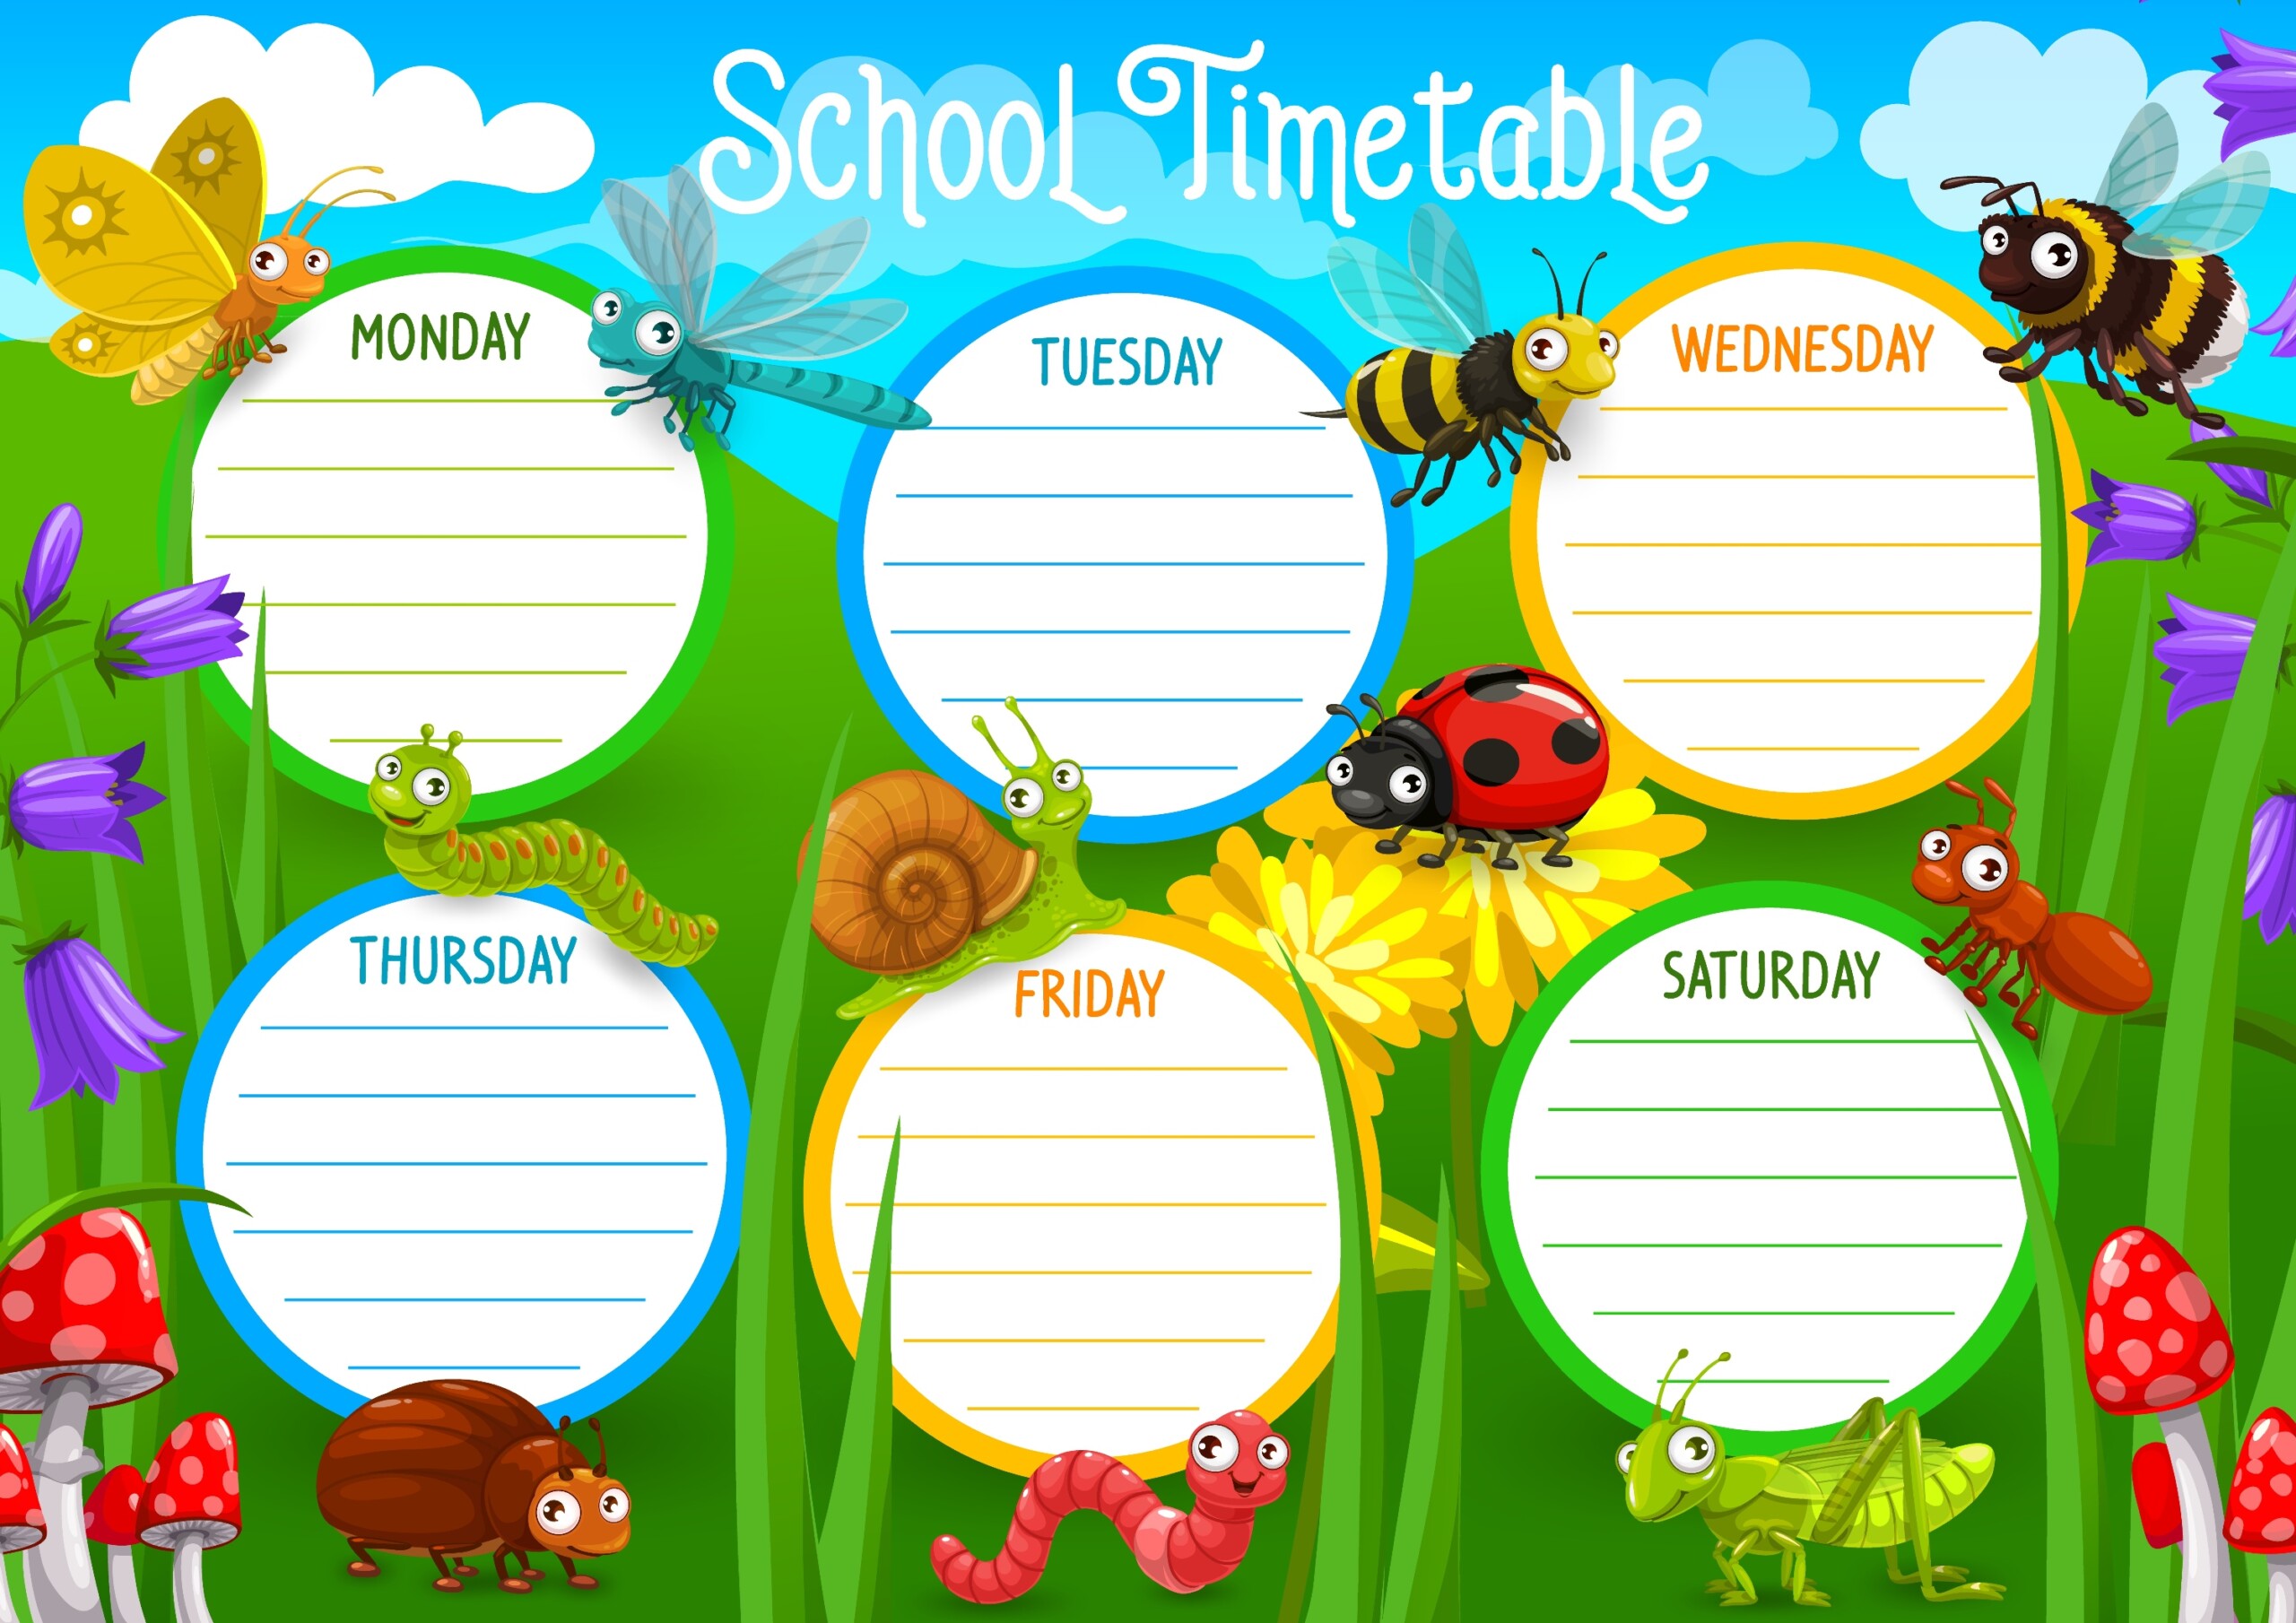 School Planner With Insects Characters - Original image